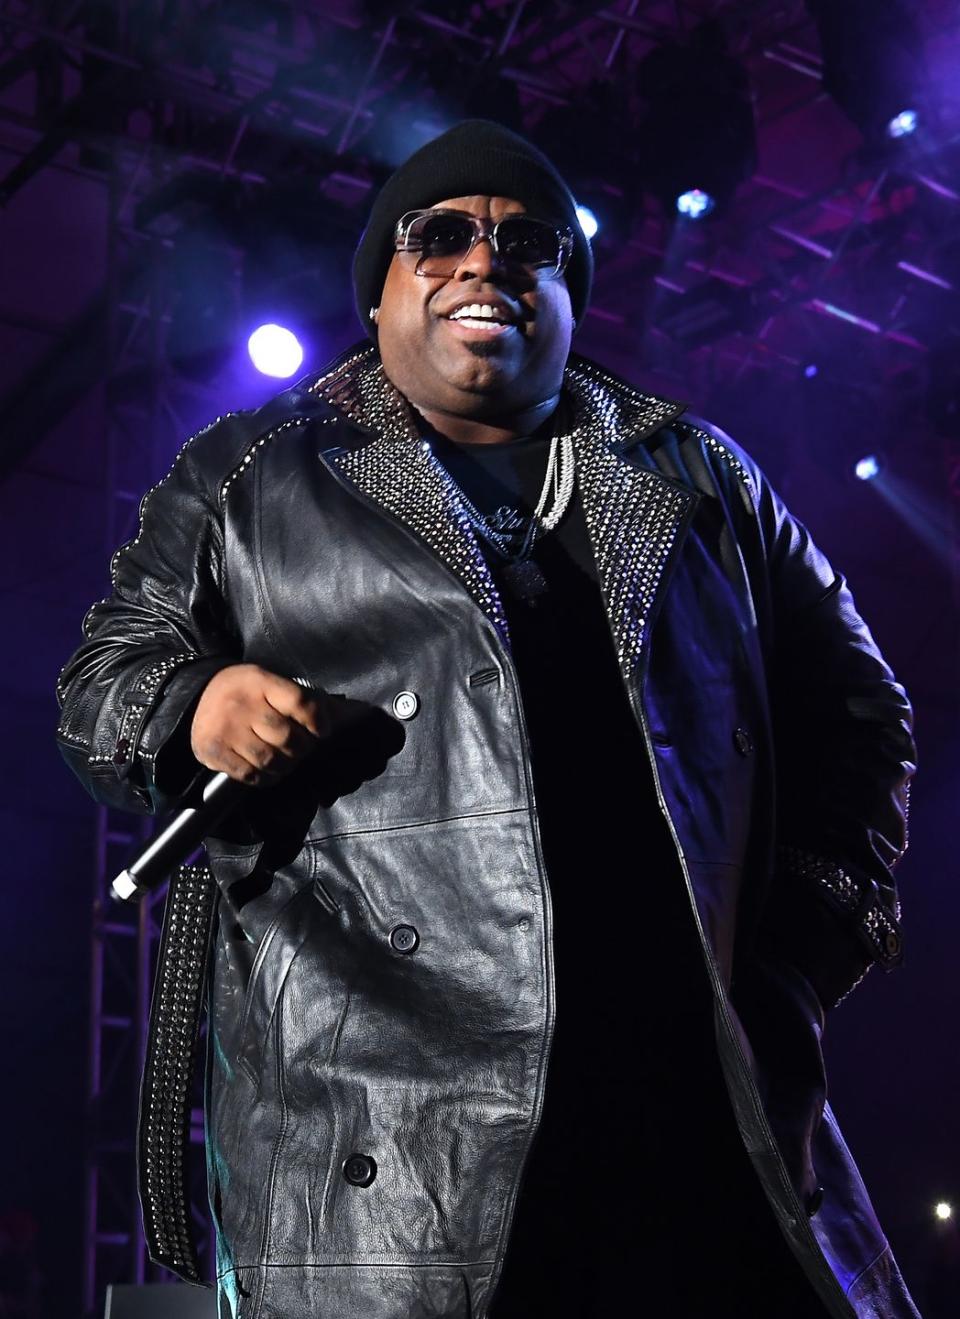 <p>In 2010, singer CeeLo Green split off from producer Danger Mouse to record his own music, including the hit “Forget You.” The duo formerly known as Gnarls Barkley hasn’t released an album since 2008, and CeeLo transitioned to coaching contestants on <em>The Voice </em>but left the show in 2018.</p>